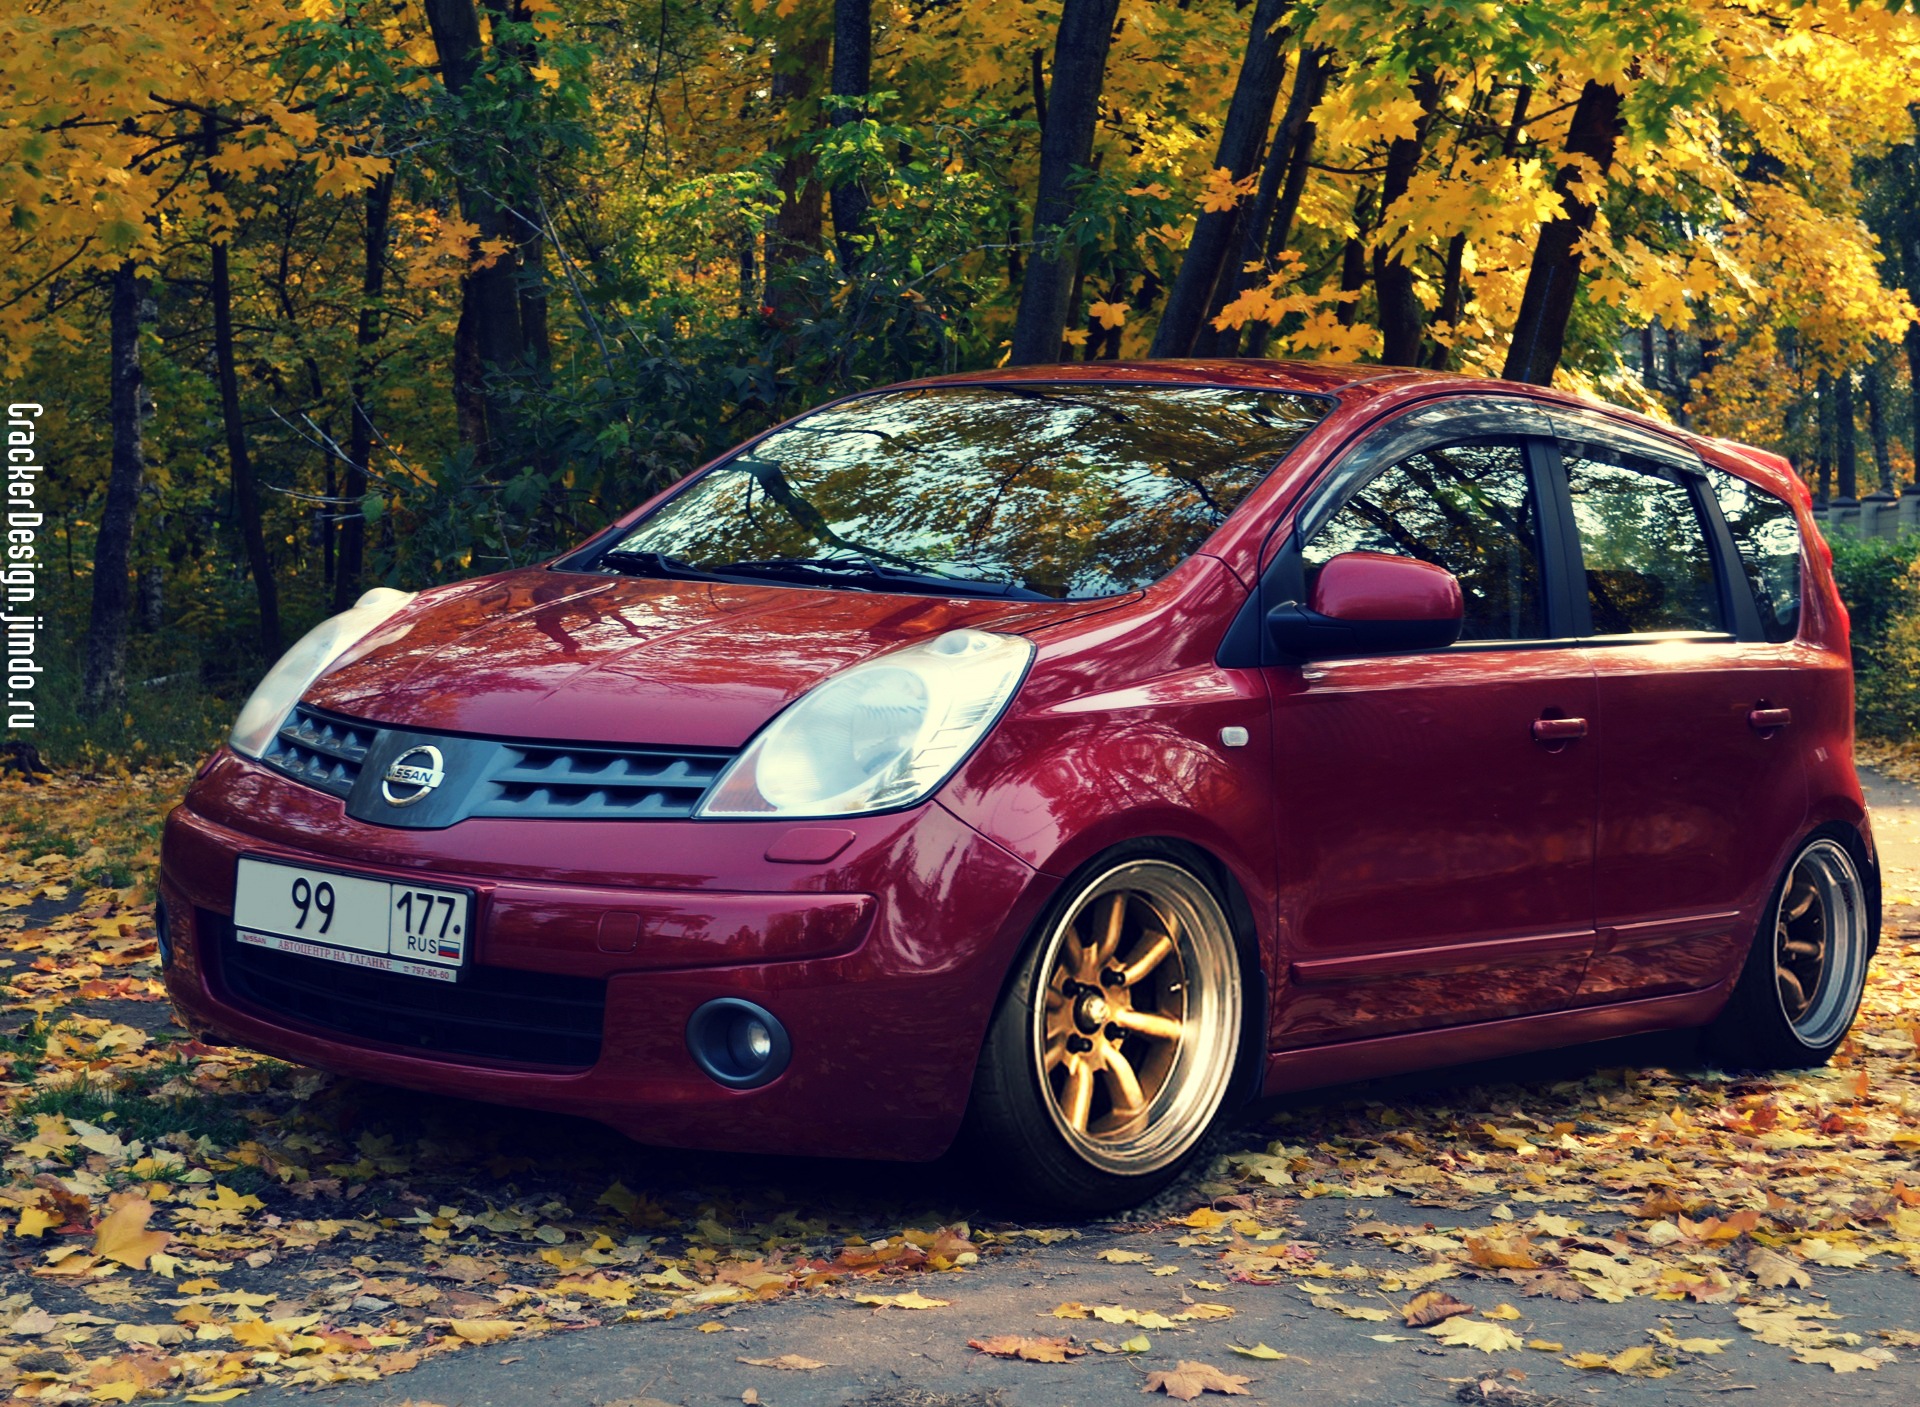 Note 11 2. Nissan Note 2008 Tuning. Ниссан ноут е11. Nissan Note e11 stance. Nissan Note 2011 1.6.